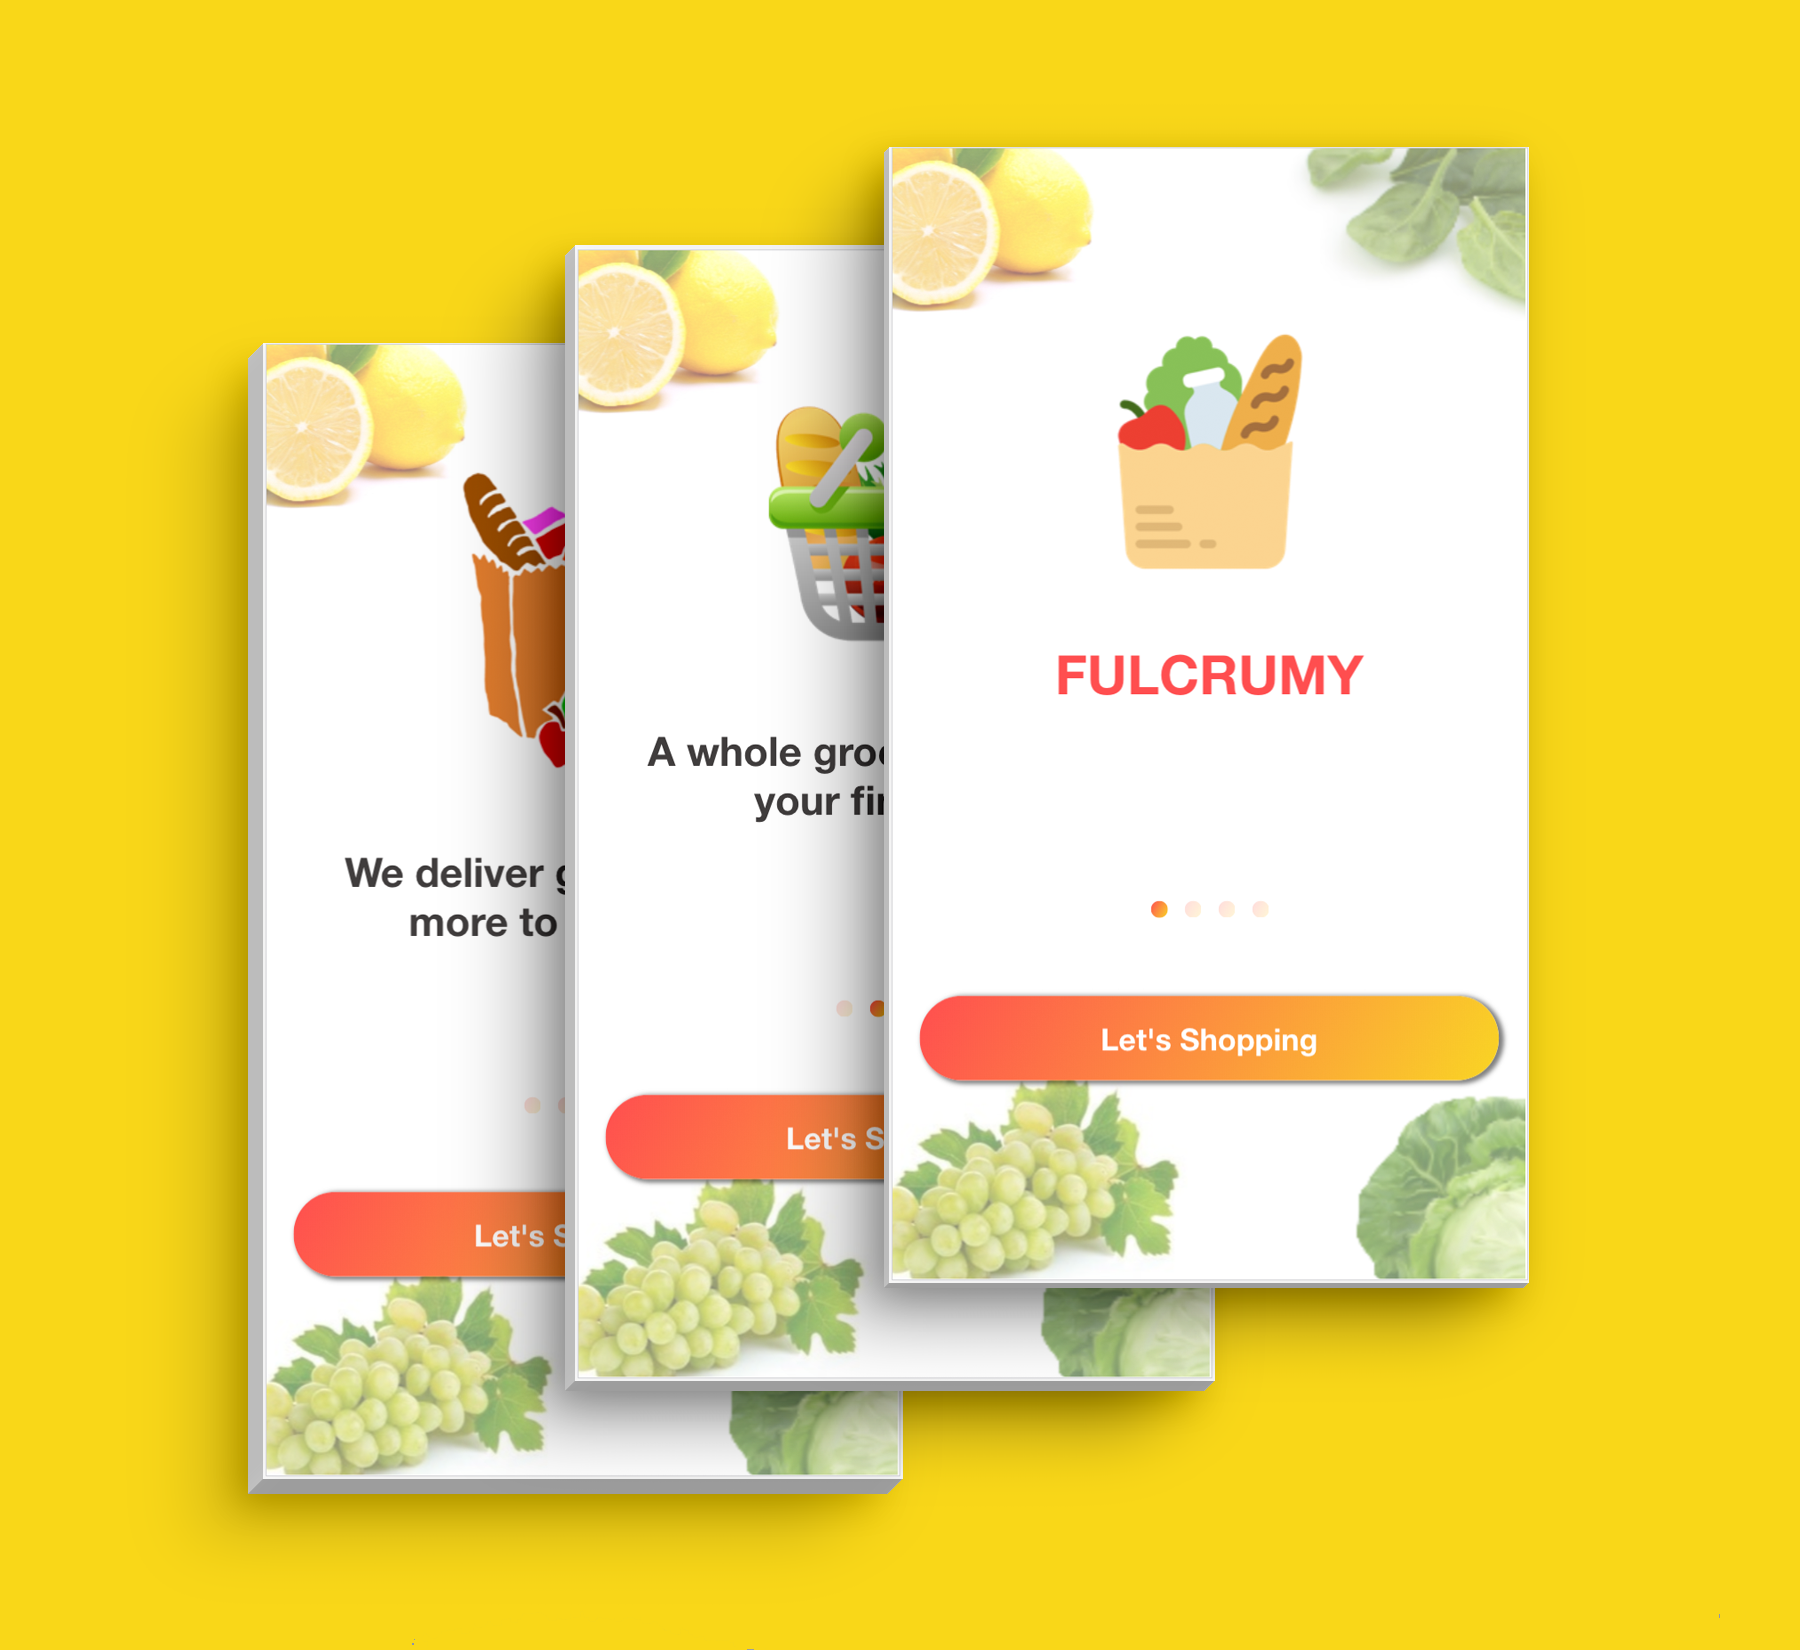 Complete Multipurpose eCommerce Template UI Grocery App Supports Multiple Language i18n - 7